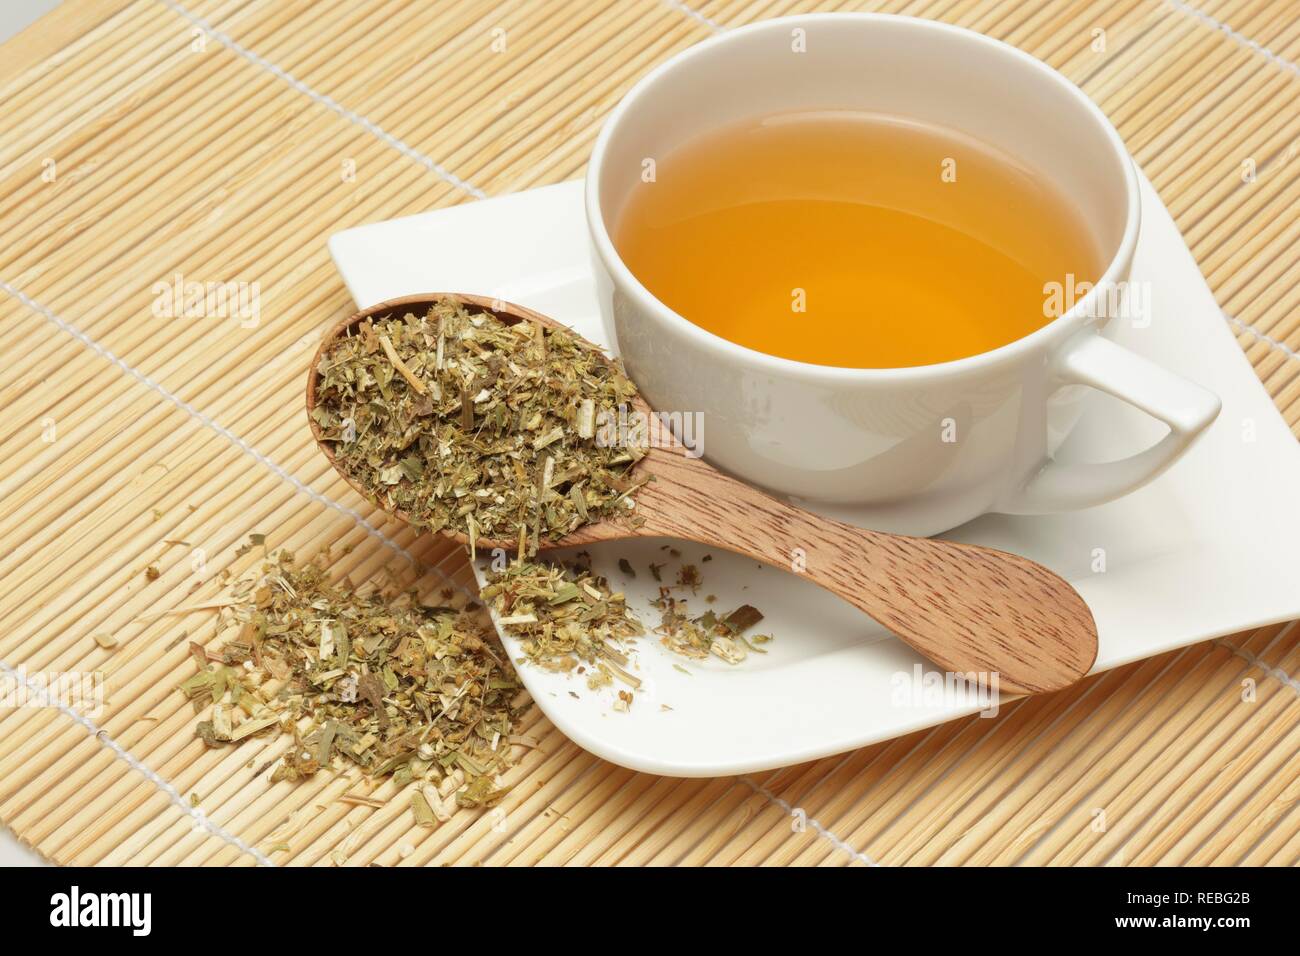 Herbal tea made of the medicinal plant Canadian Golden-rod (Solidago canadensis) Stock Photo